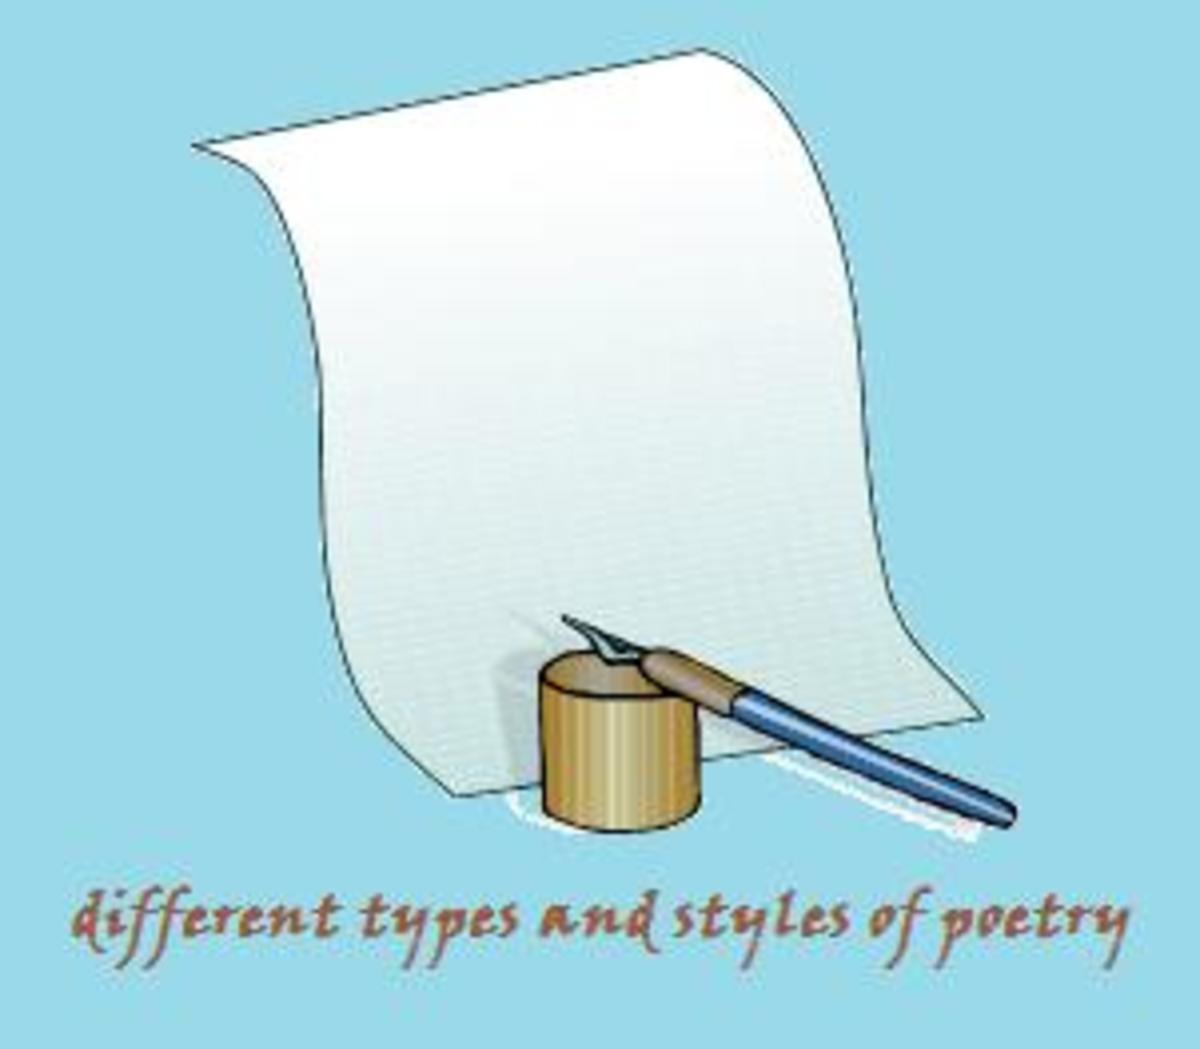 Difference Between Freestyle, Free Verse, Traditional Poetry and Other Styles